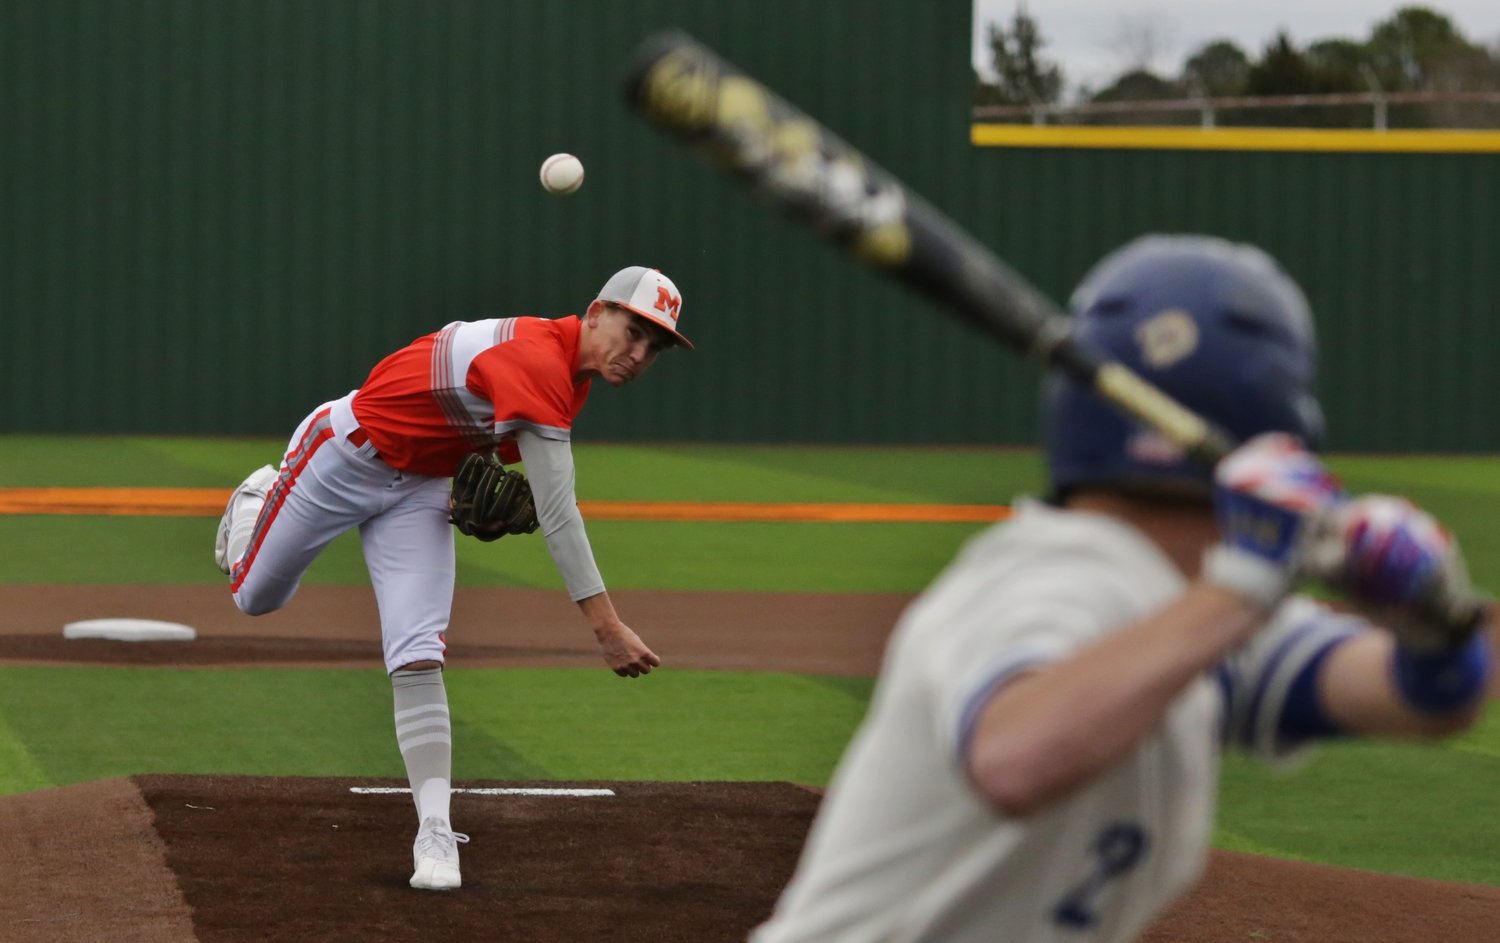 Mineola’s Spencer Joyner and Quitman’s Landon Richey provided a real pitching duel, last week. Mineola took the game 4-1.